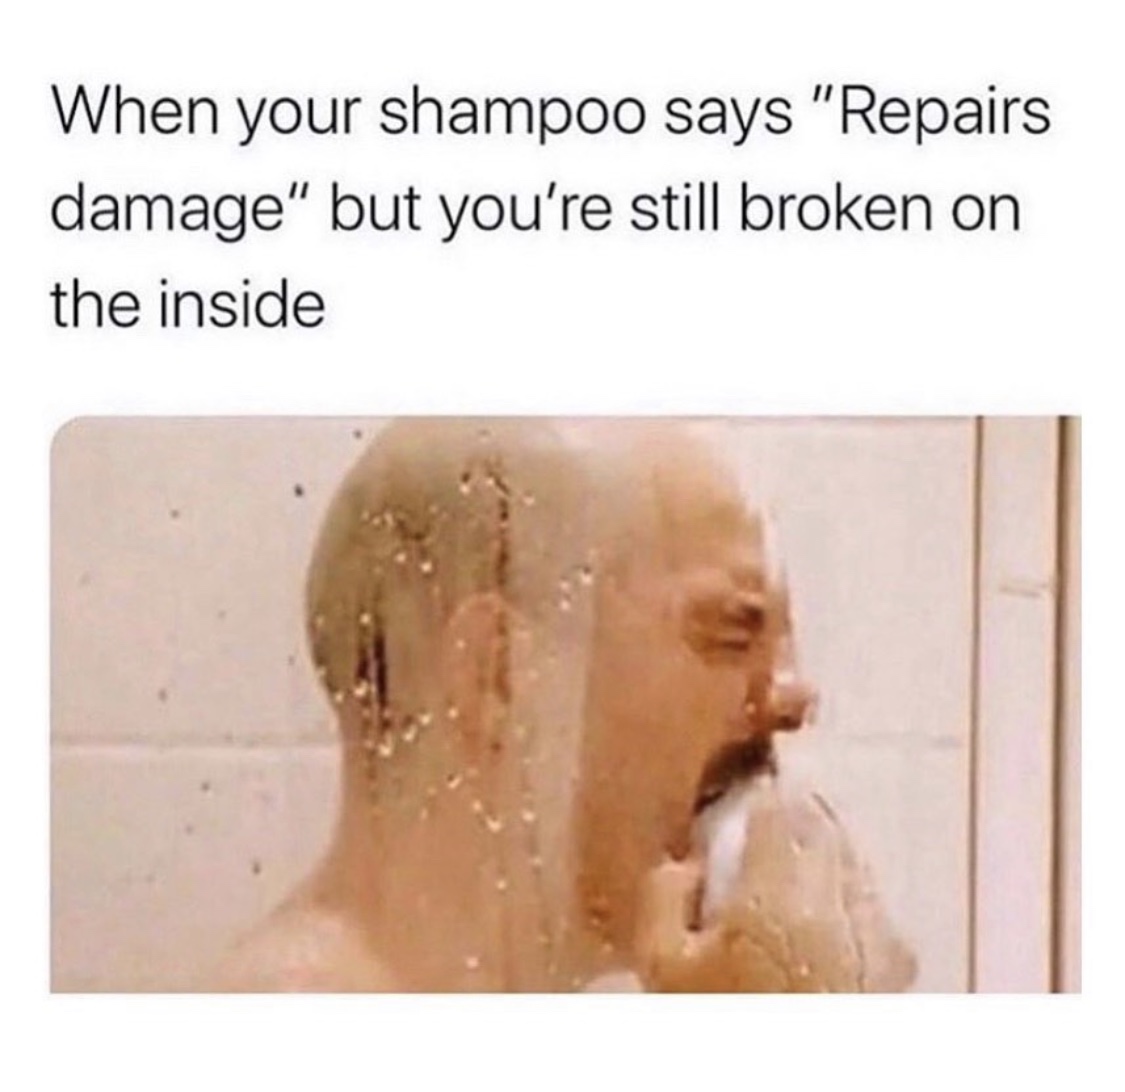 shampoo funny - When your shampoo says "Repairs damage" but you're still broken on the inside